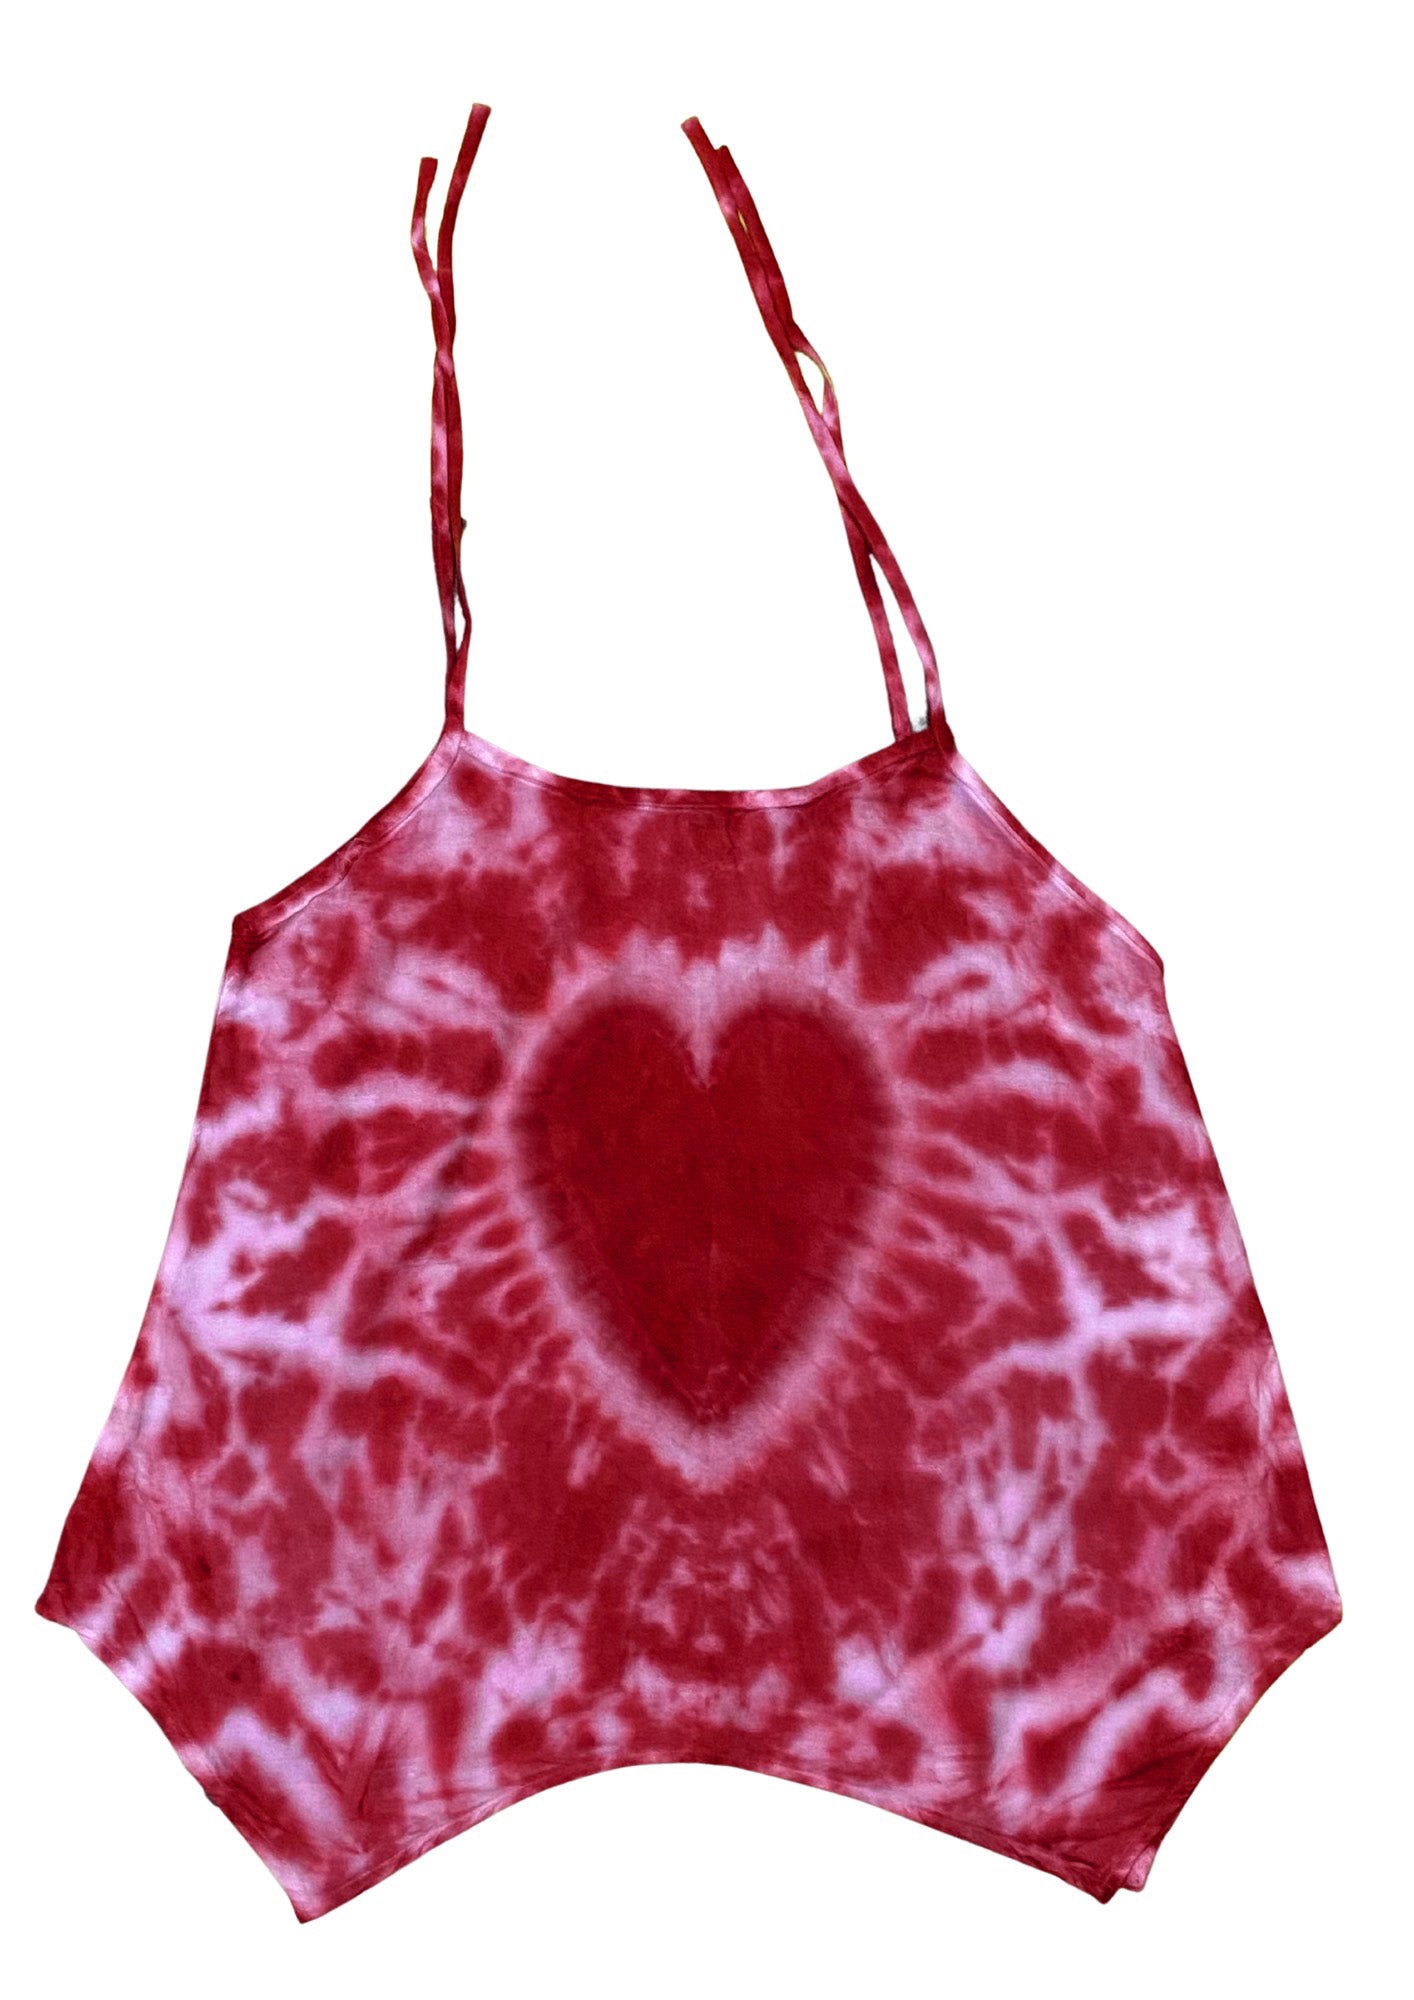 Cami Camisole Teen & Women, One Size Free Size Fit 0 to 8, Handmade Tie Dyed - Maroon RED Heart